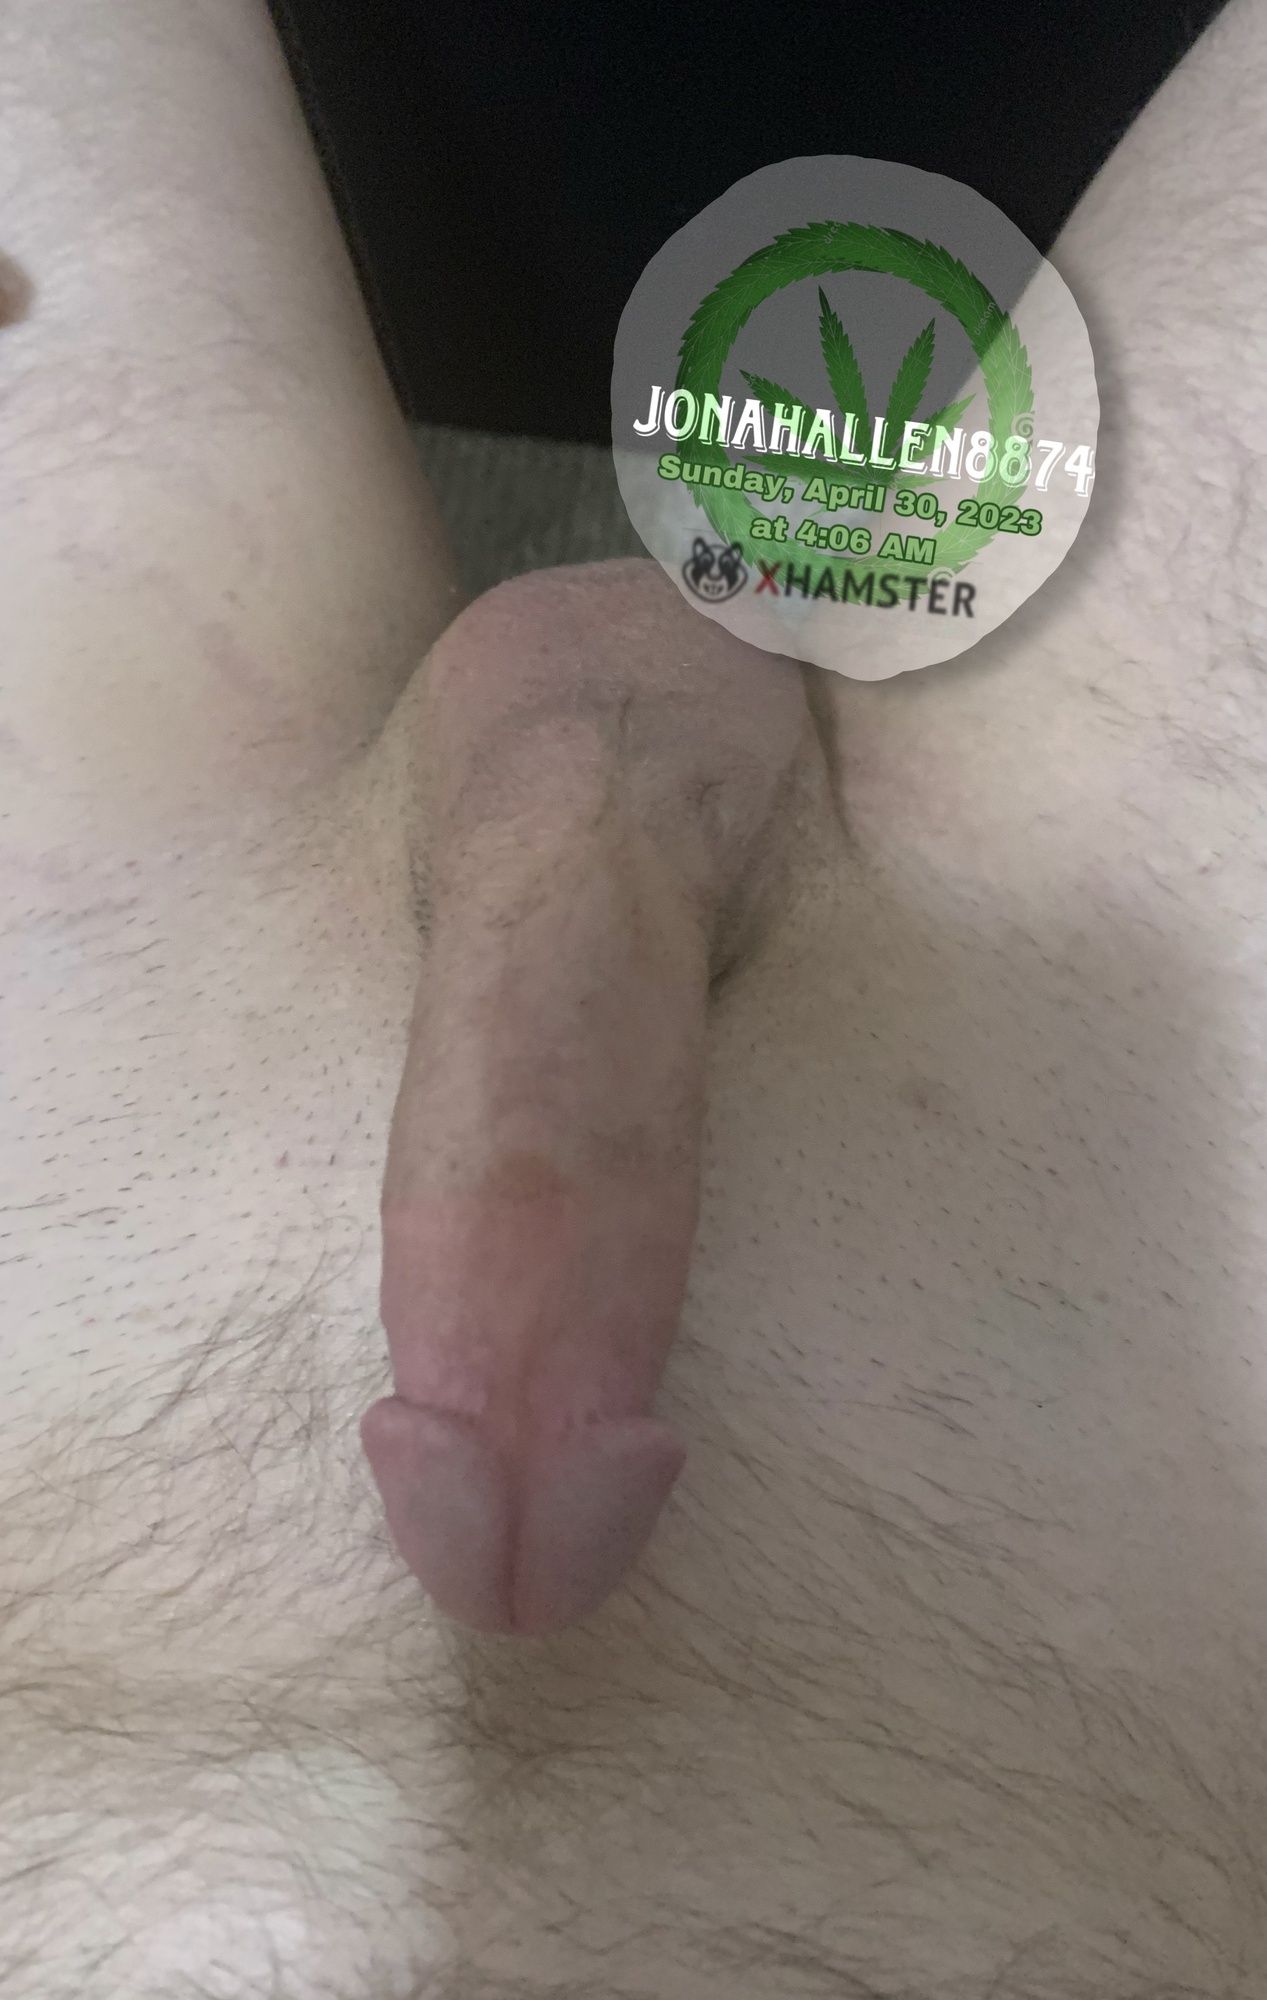 Me and my cock  #2